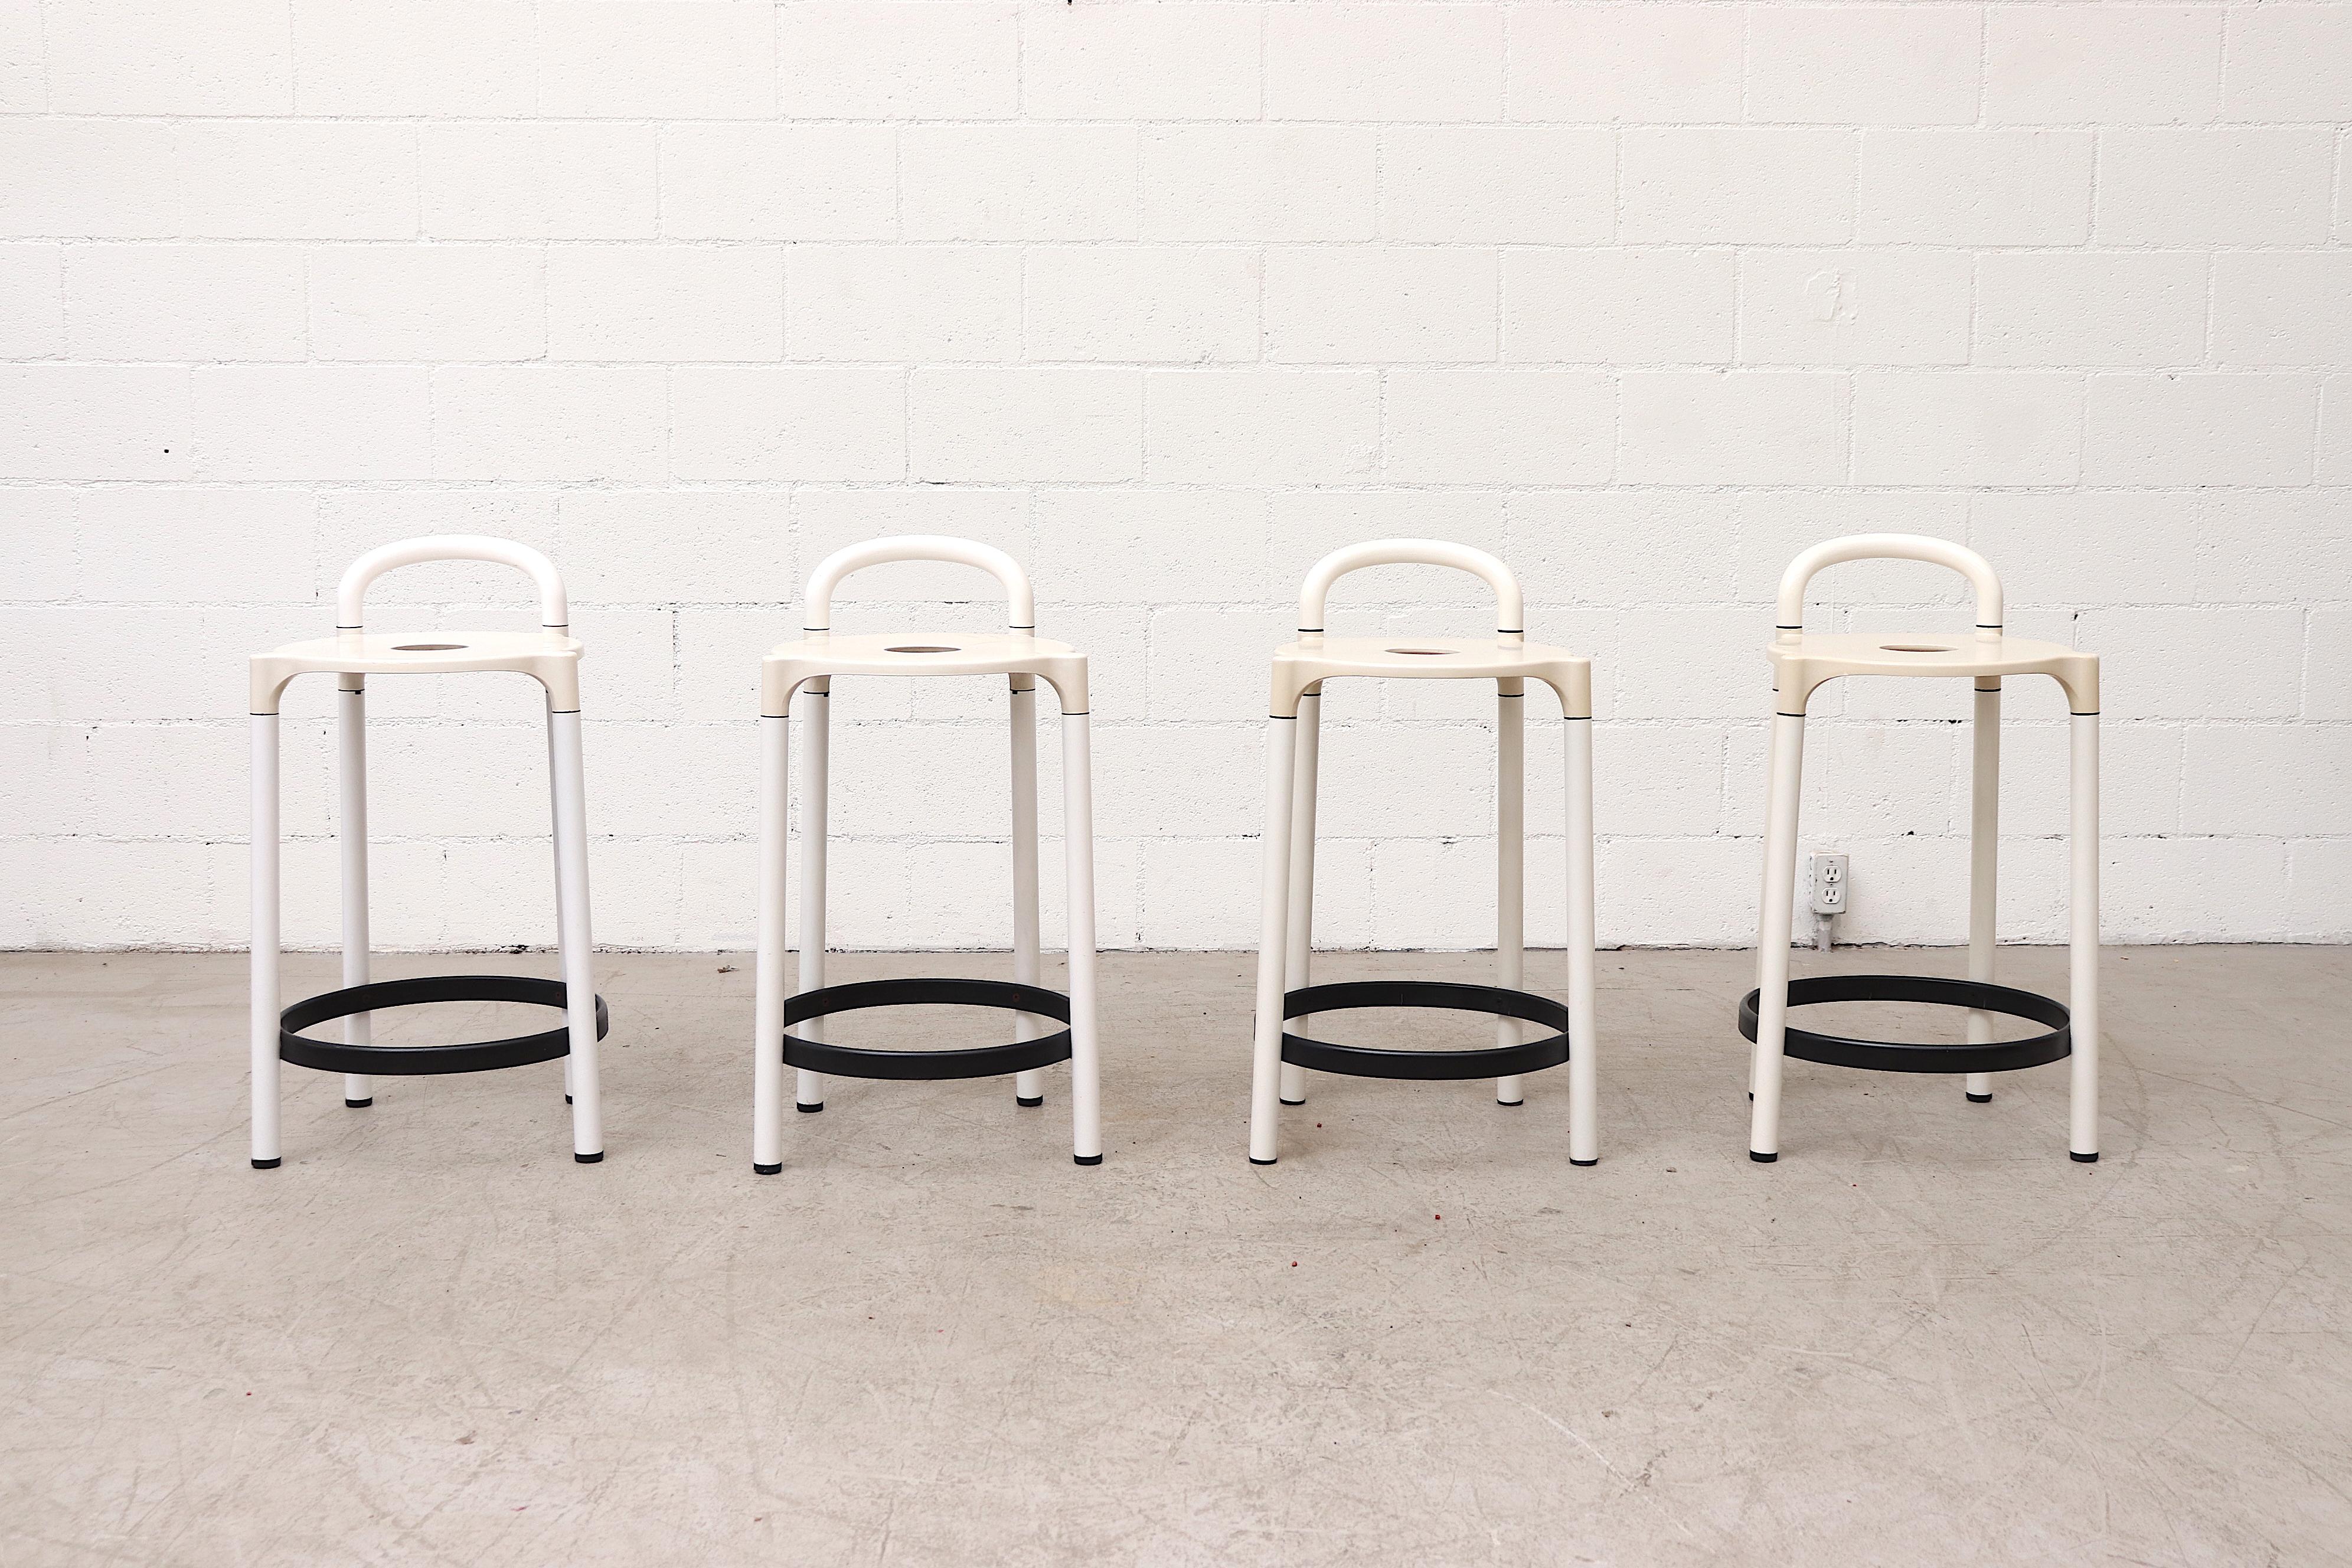 Awesome set of 4 midcentury Italian Kartell bar stools by Anna Castelli Ferrieri, 1979. White acrylic frame with black foot rests great modern design. Stools have visible wear and scratching, and are in very original condition. Wear is consistent